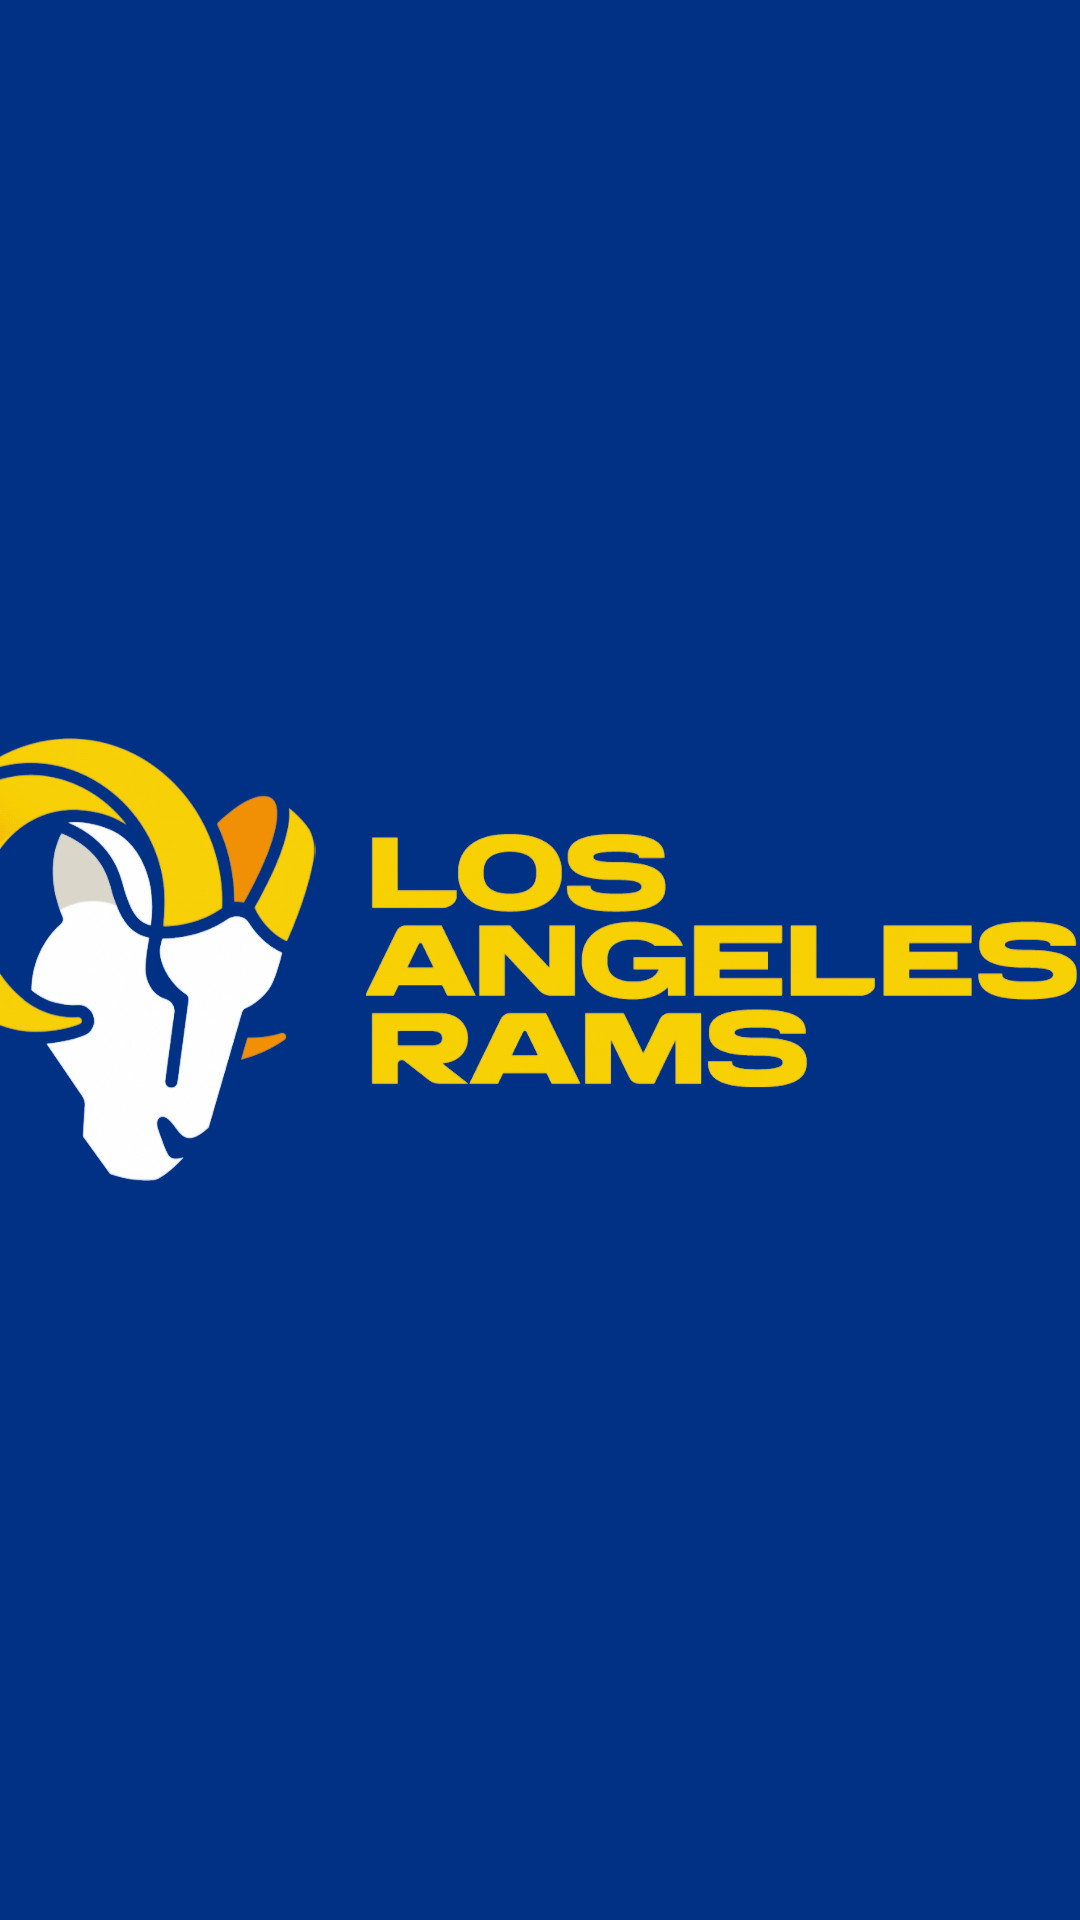 Los Angeles Rams Wallpaper Mobile with high-resolution 1080x1920 pixel. You can use and set as wallpaper for Notebook Screensavers, Mac Wallpapers, Mobile Home Screen, iPhone or Android Phones Lock Screen